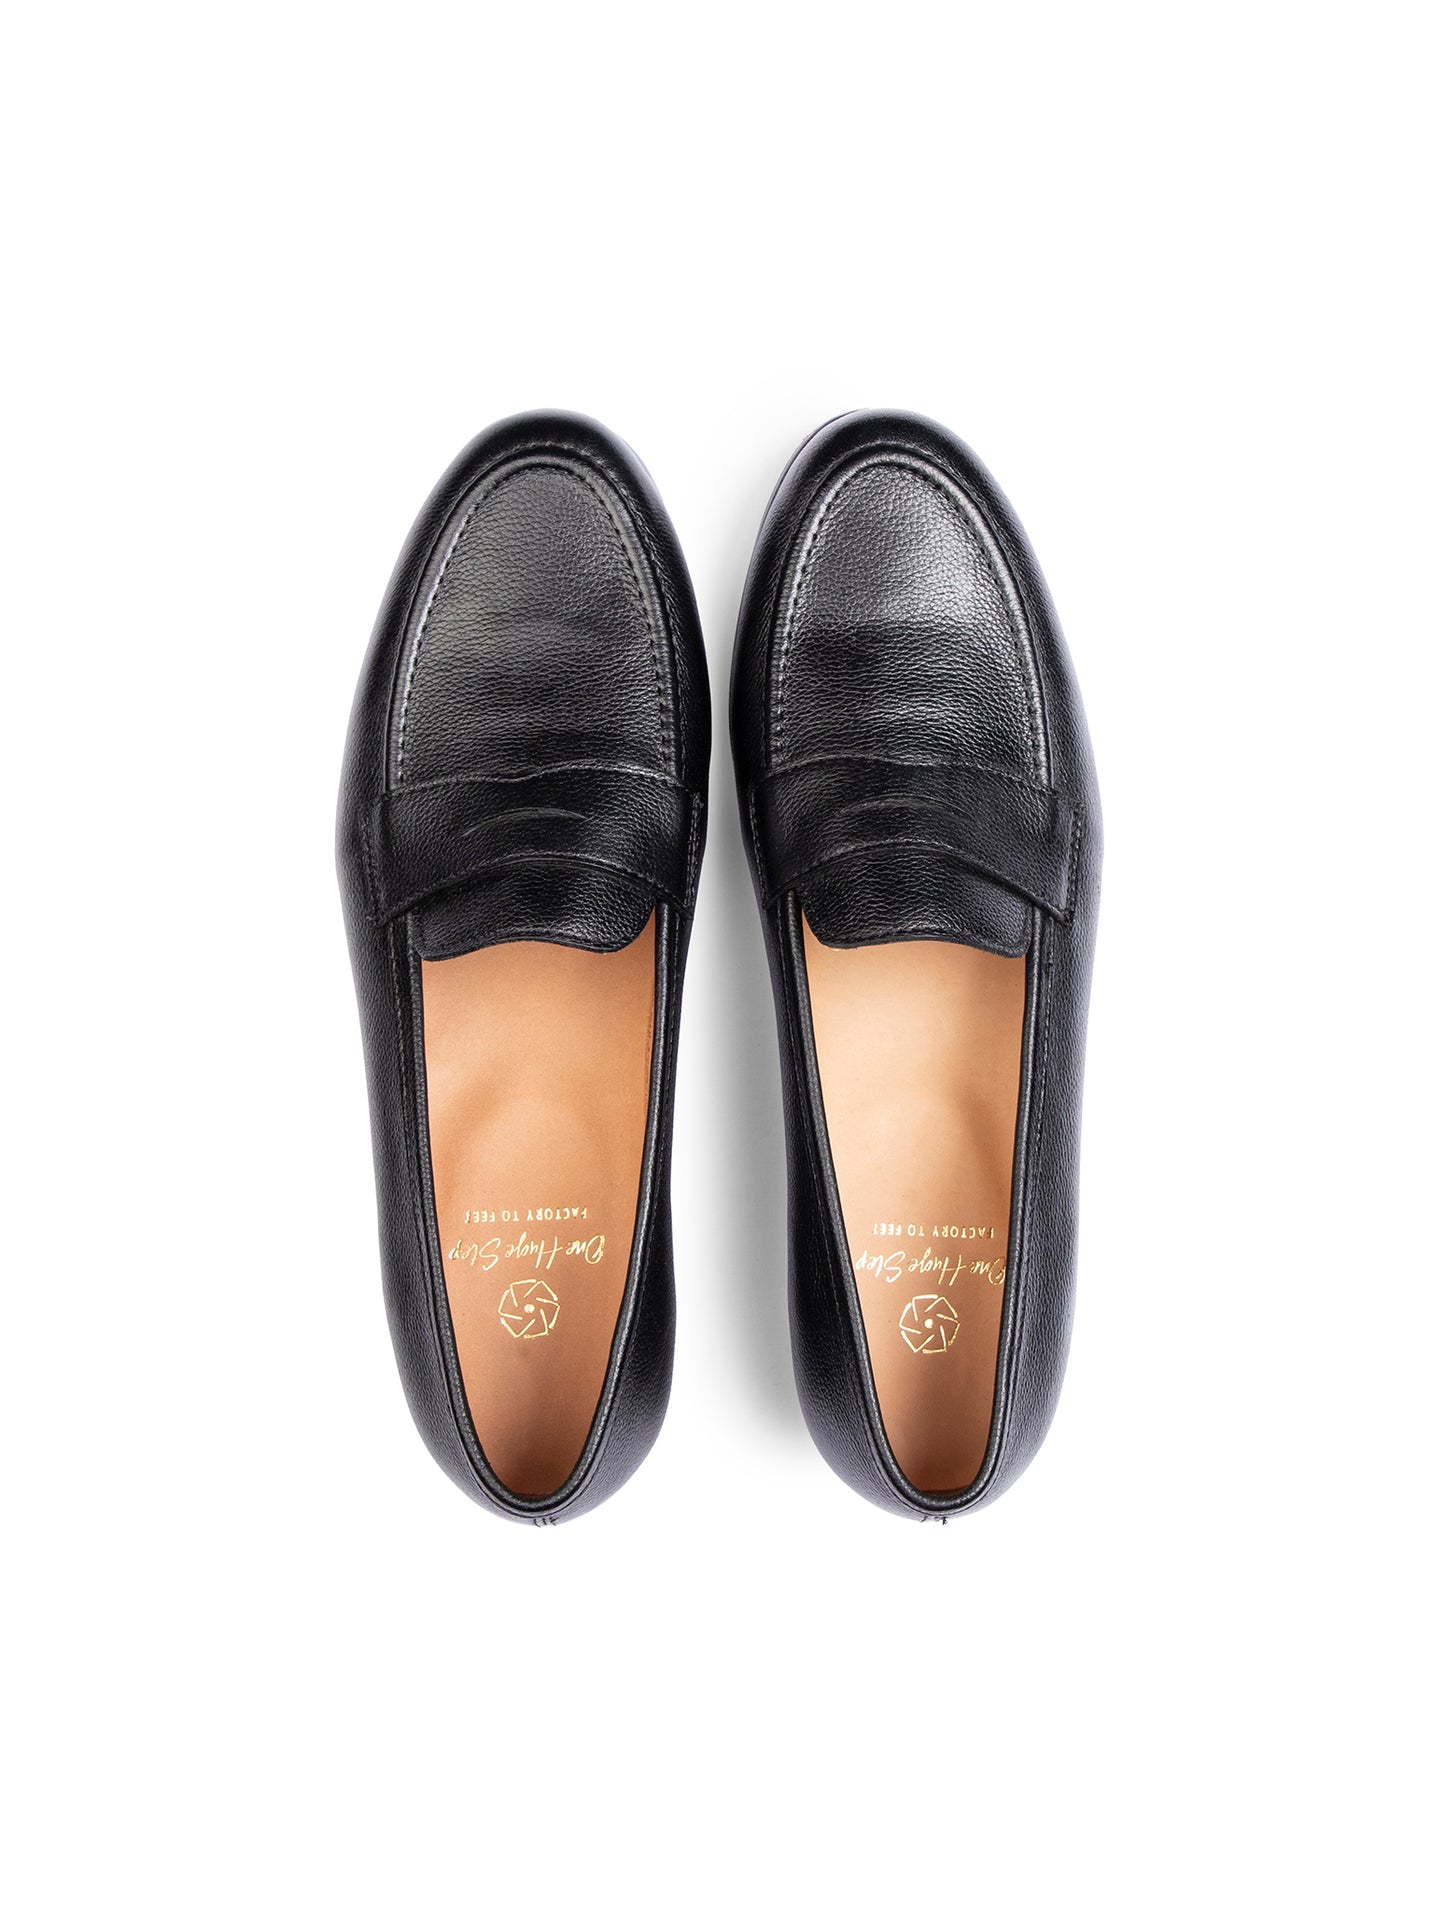 Penny loafer with cord stitching on the vamp